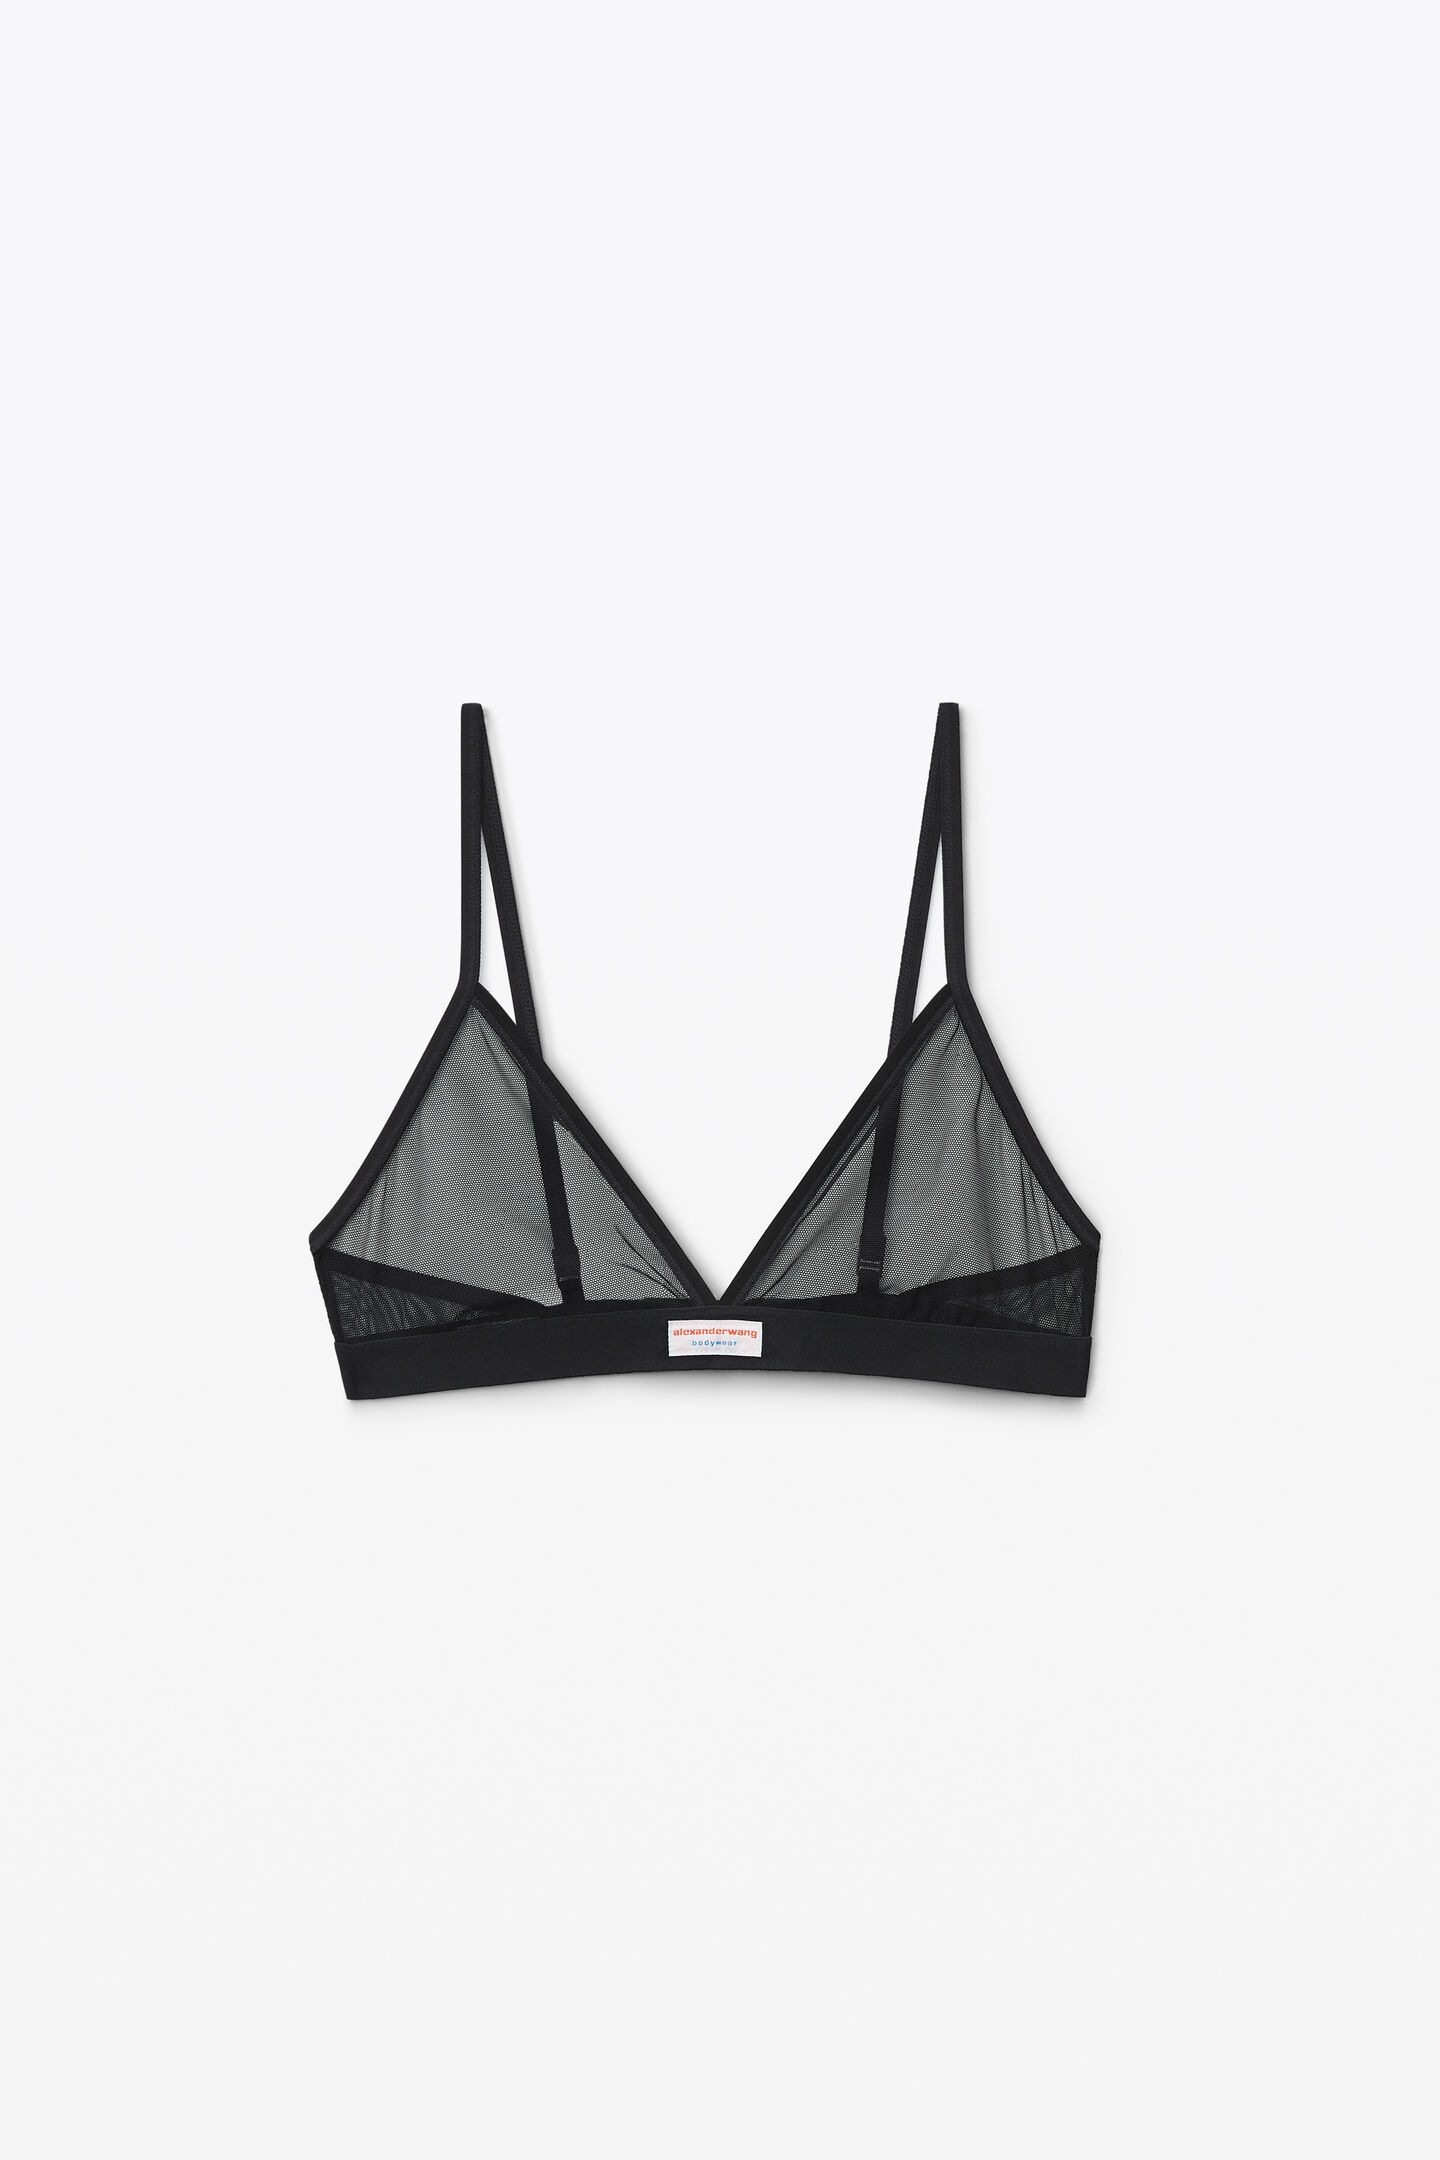 Don't Mesh With Us Triangle Bralette and Panty Set